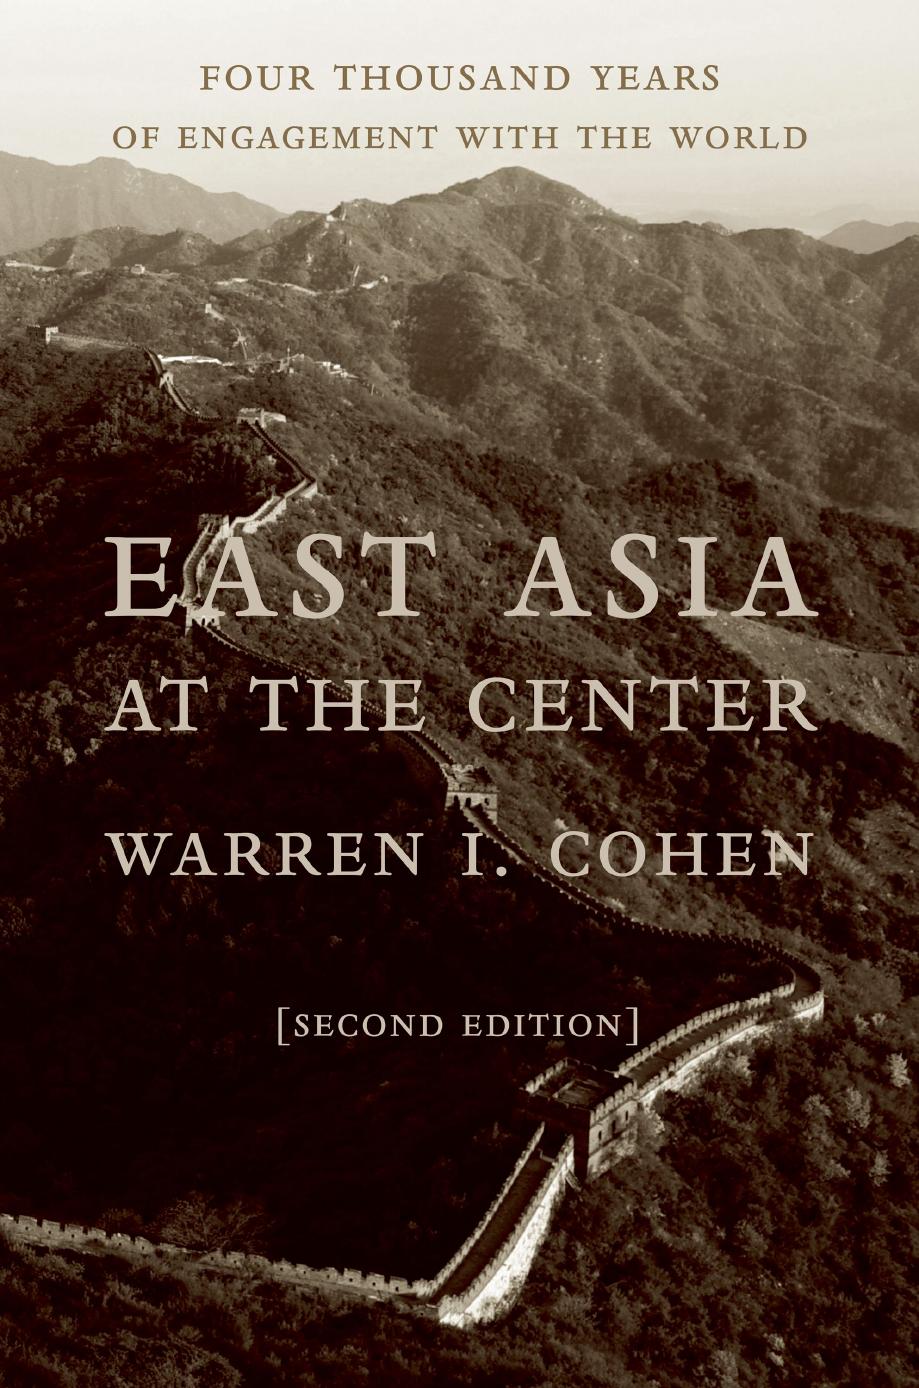 East Asia at the Center: Four Thousand Years of Engagement with the World by Warren I. Cohen